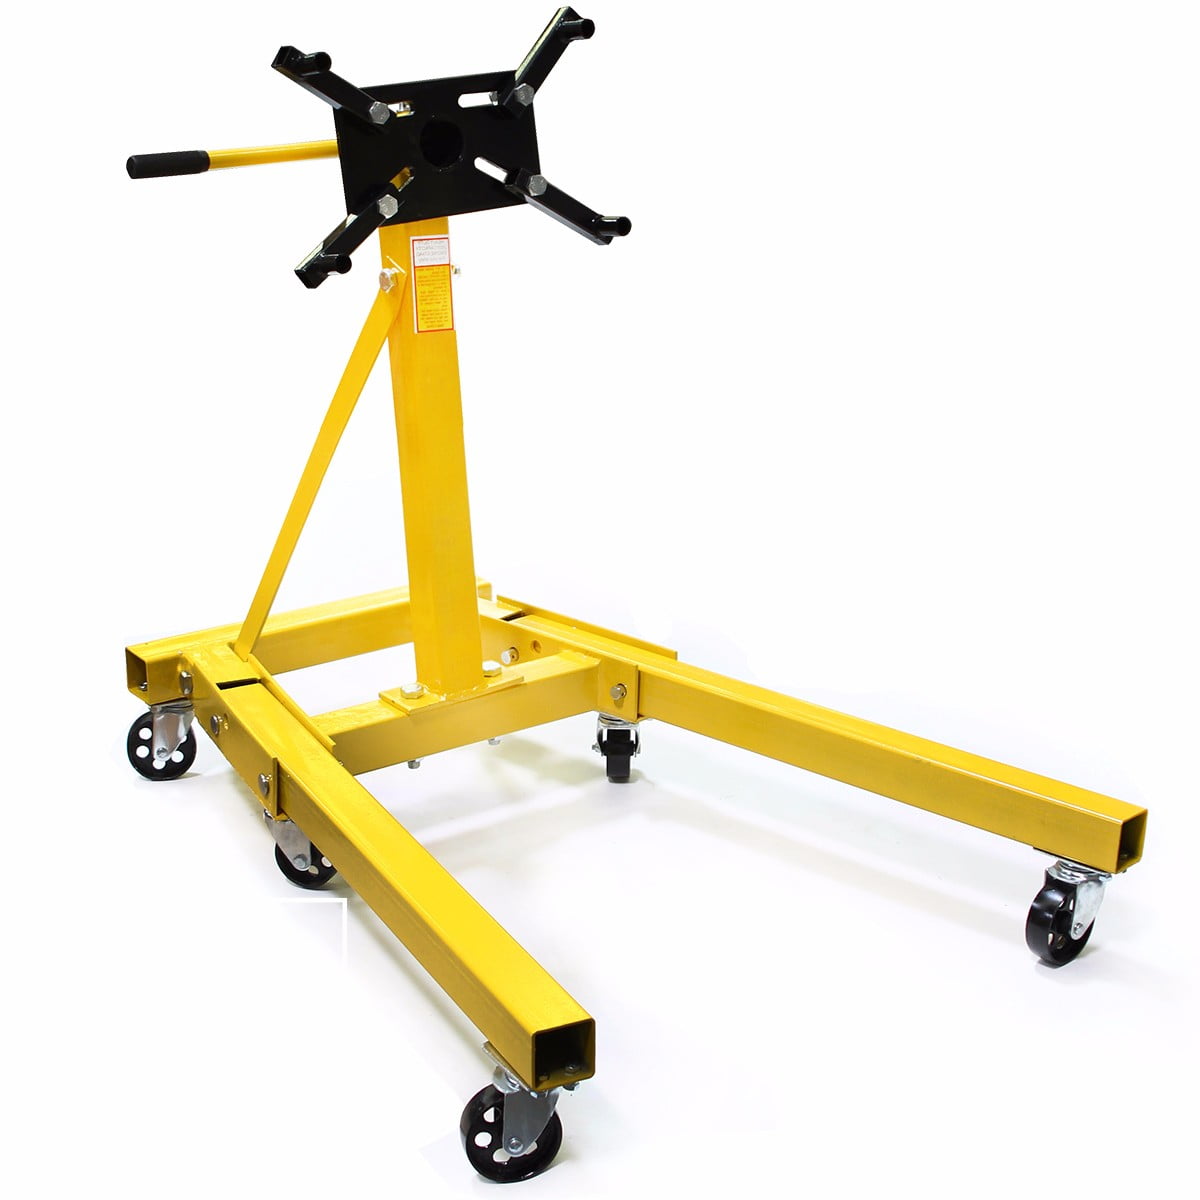 Best Choice Products Engine Stand 1000lb Pro Stand Hoist Lift Automotive Tools Shop Equipment New 